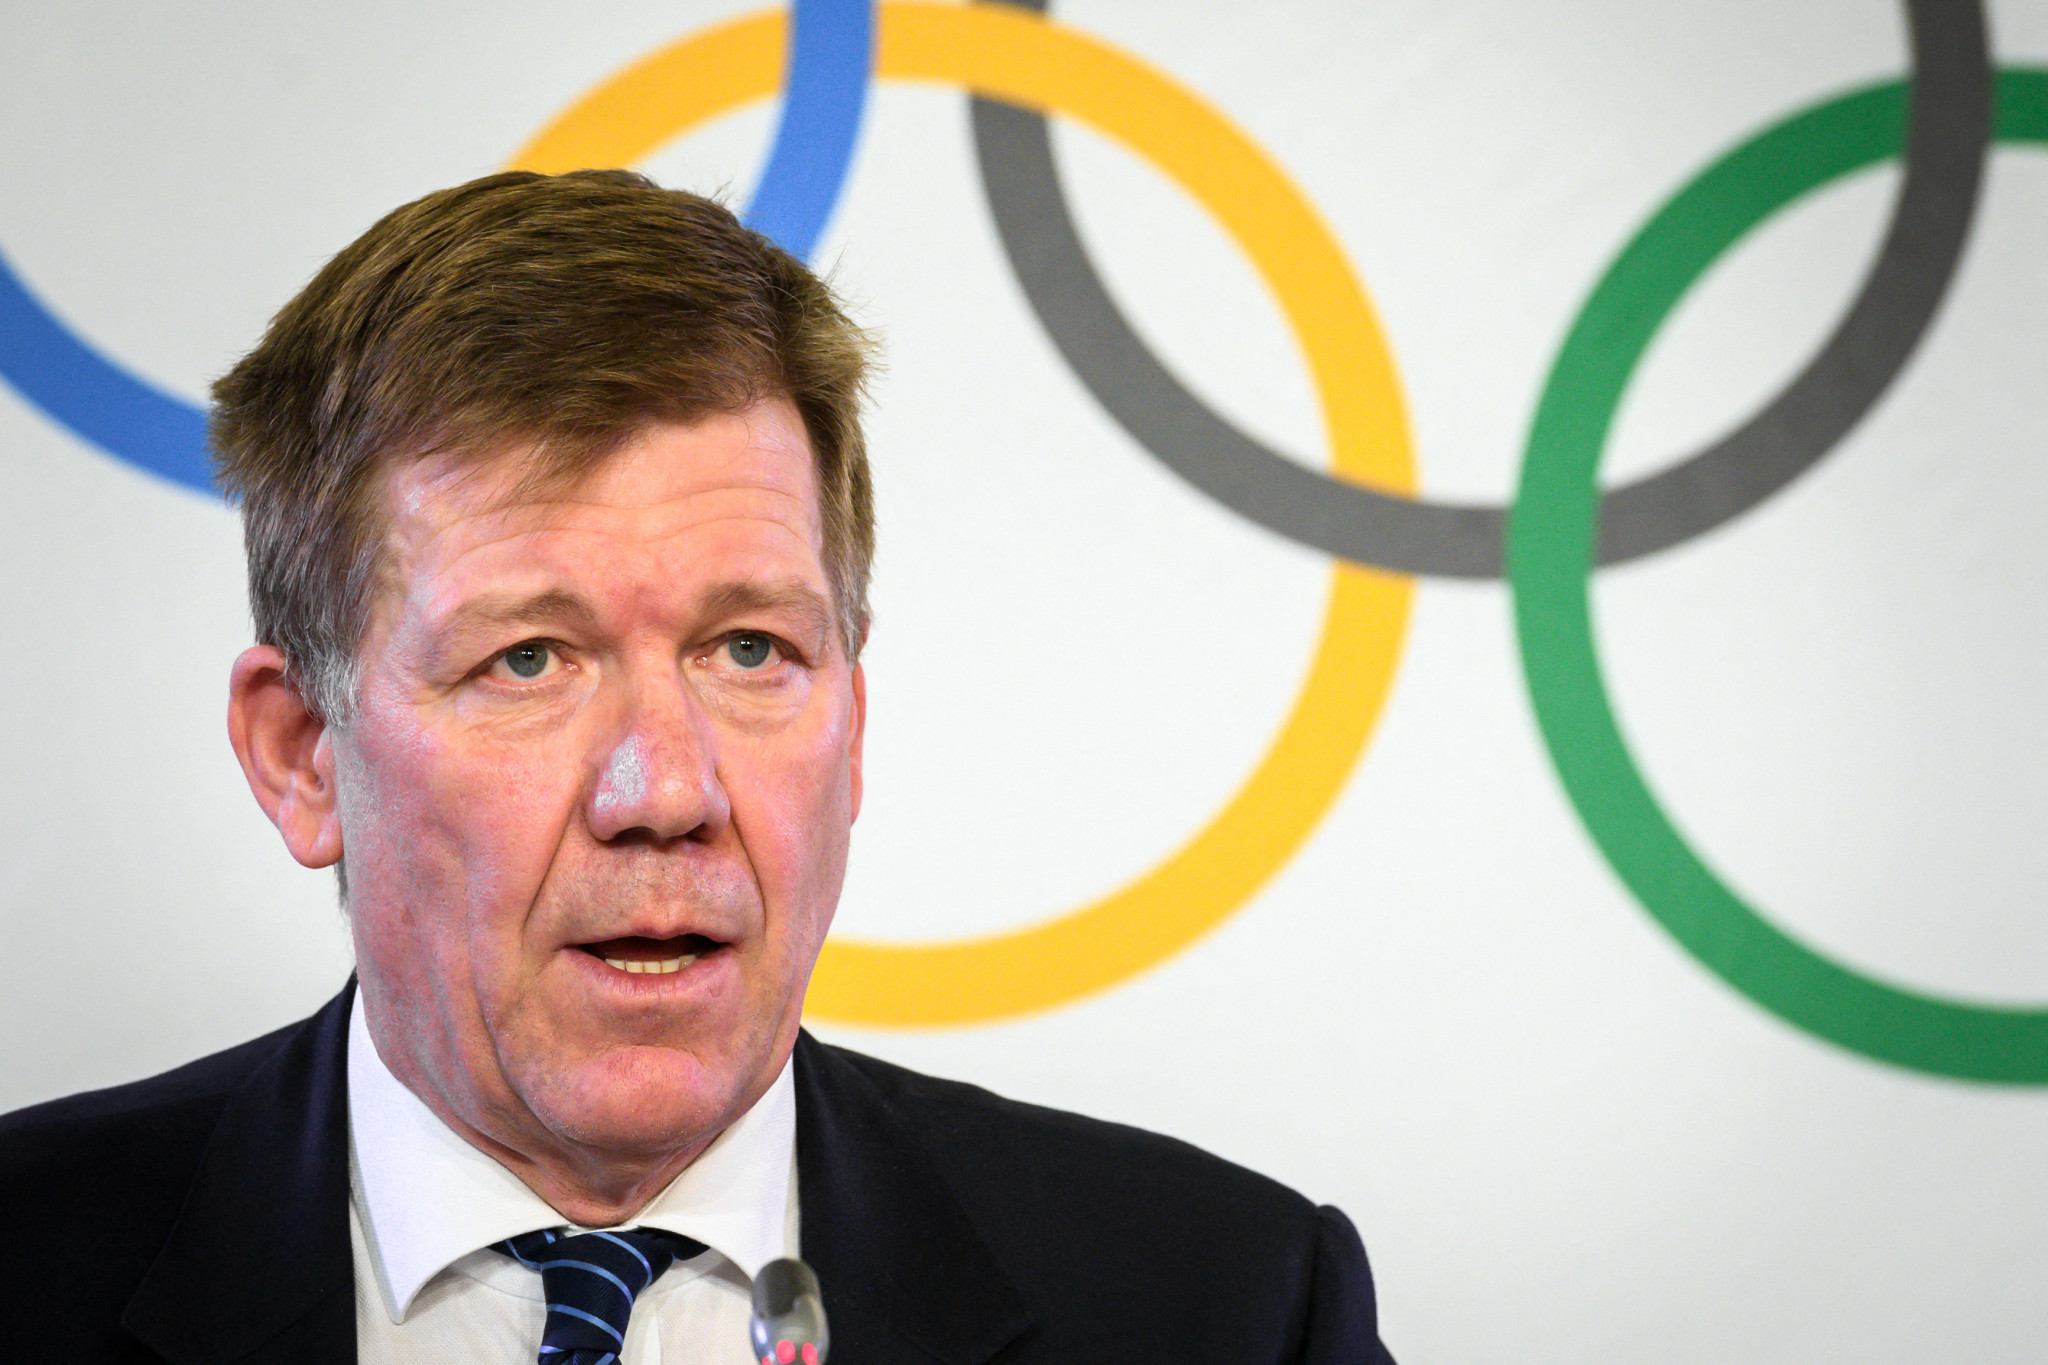 IOC medical and science director Richard Budgett claimed the course 